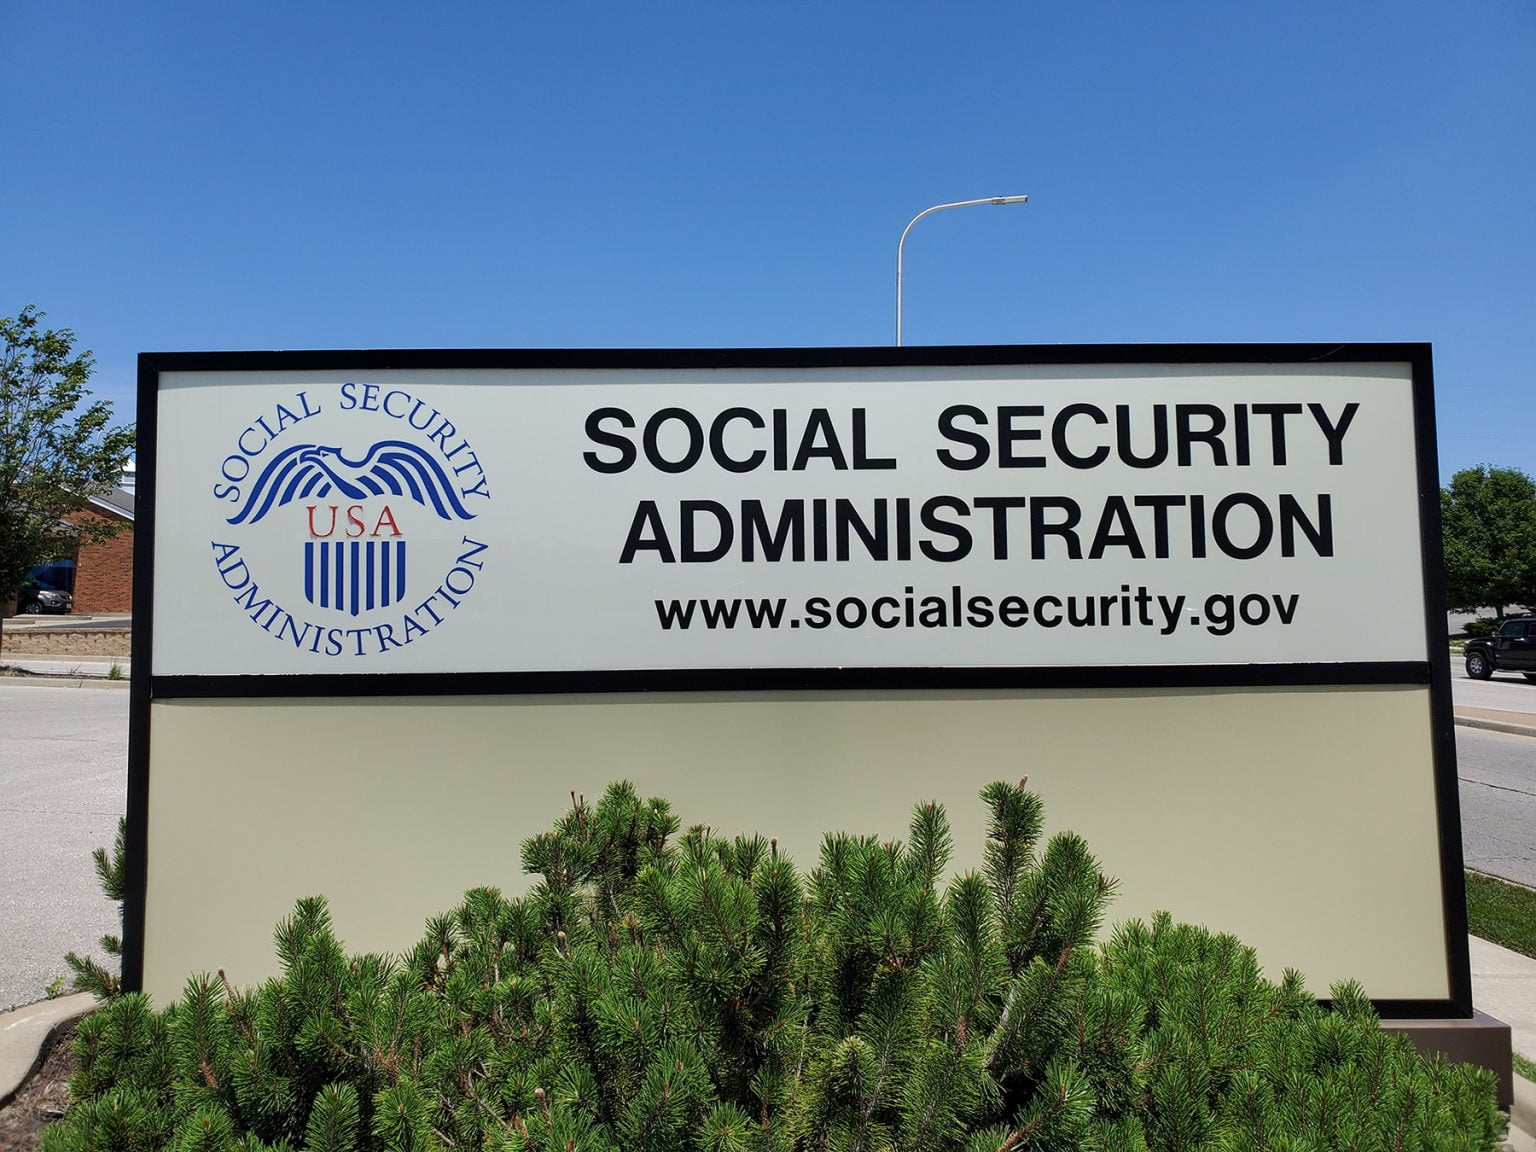 Social Security Administration sign with logo and website URL